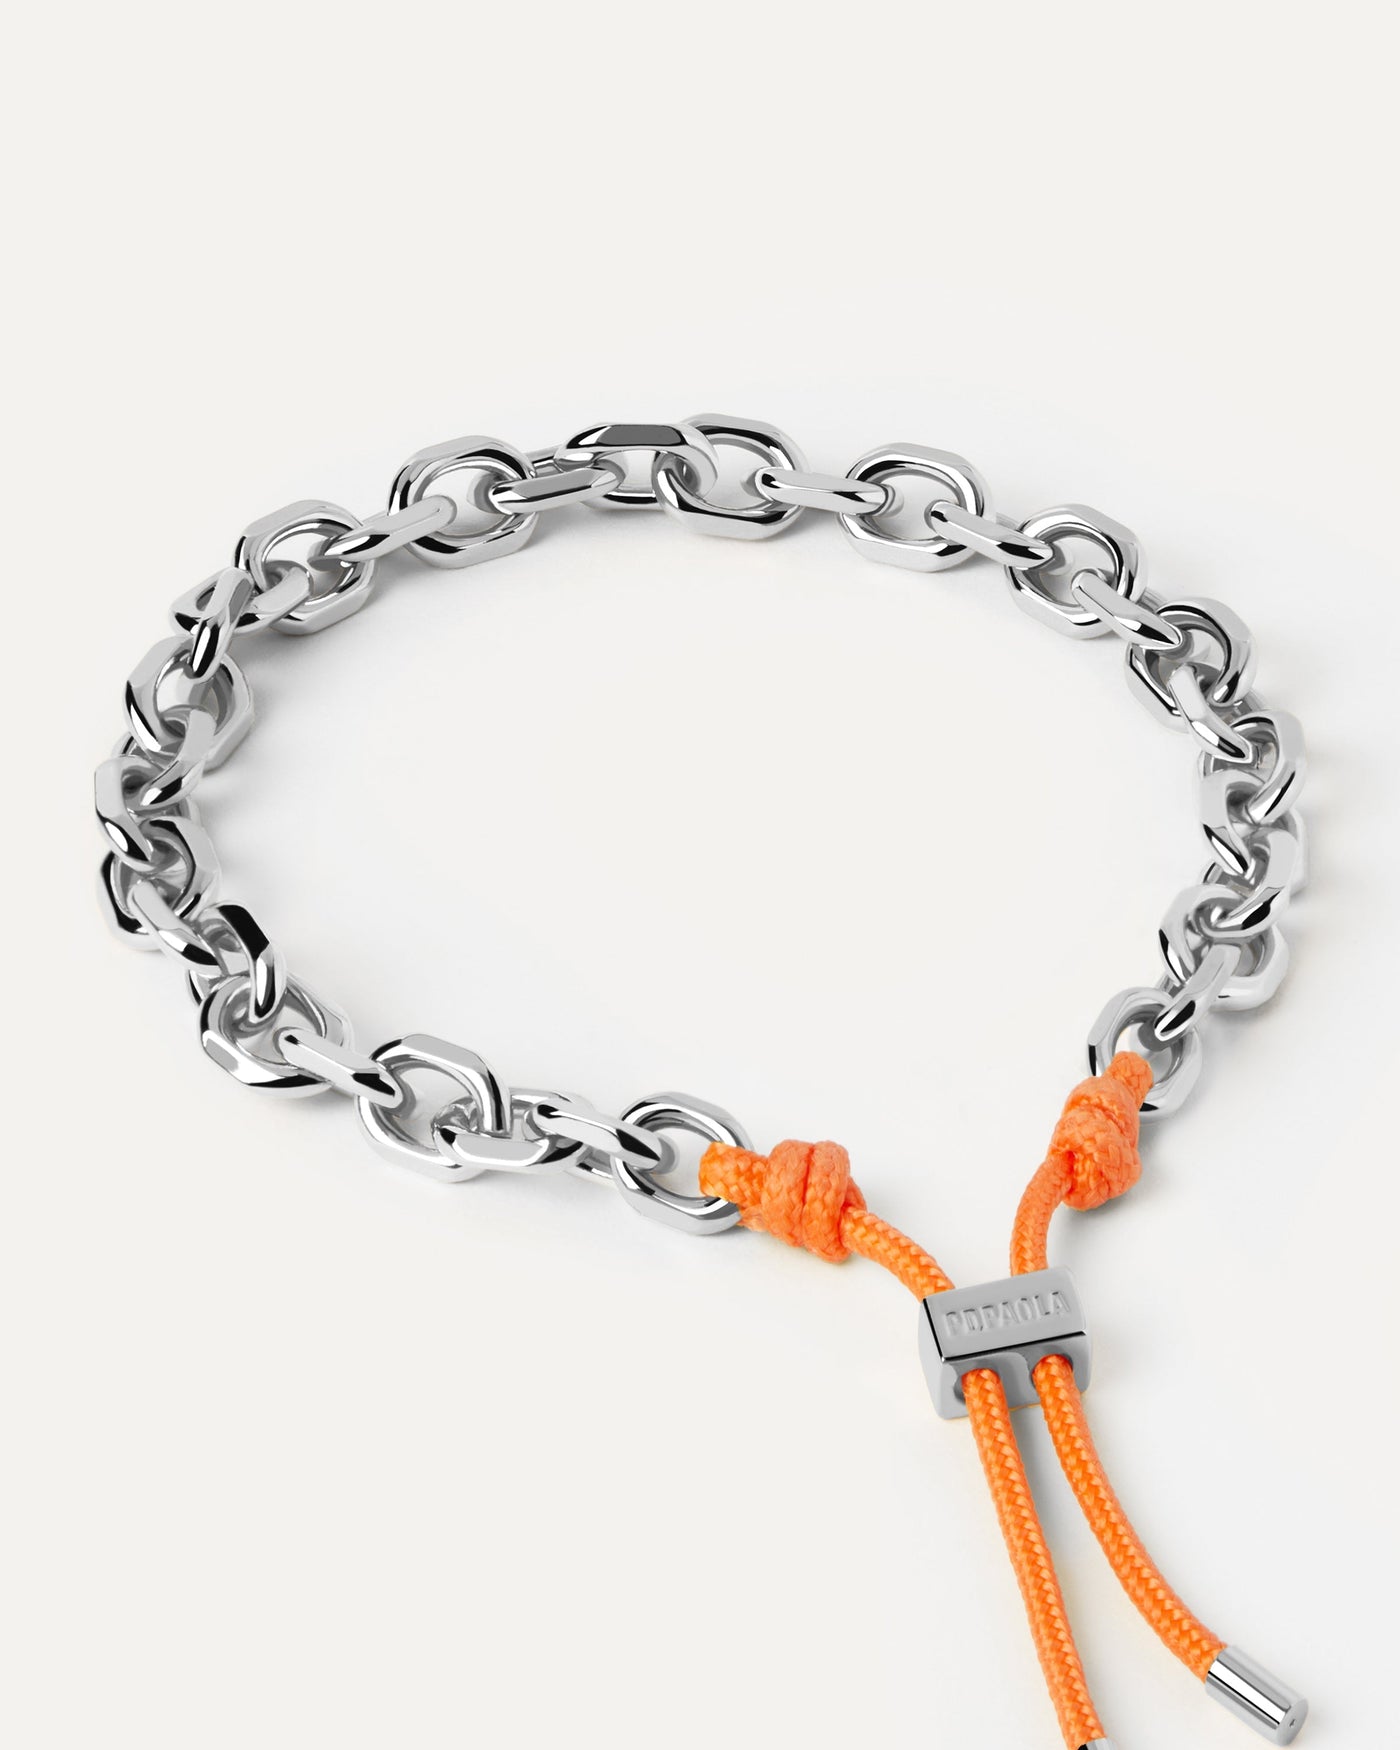 2023 Selection | Tangerine Essential Rope and Chain Silver Bracelet. Silver chain bracelet with a multicolor rope adjustable sliding clasp. Get the latest arrival from PDPAOLA. Place your order safely and get this Best Seller. Free Shipping.